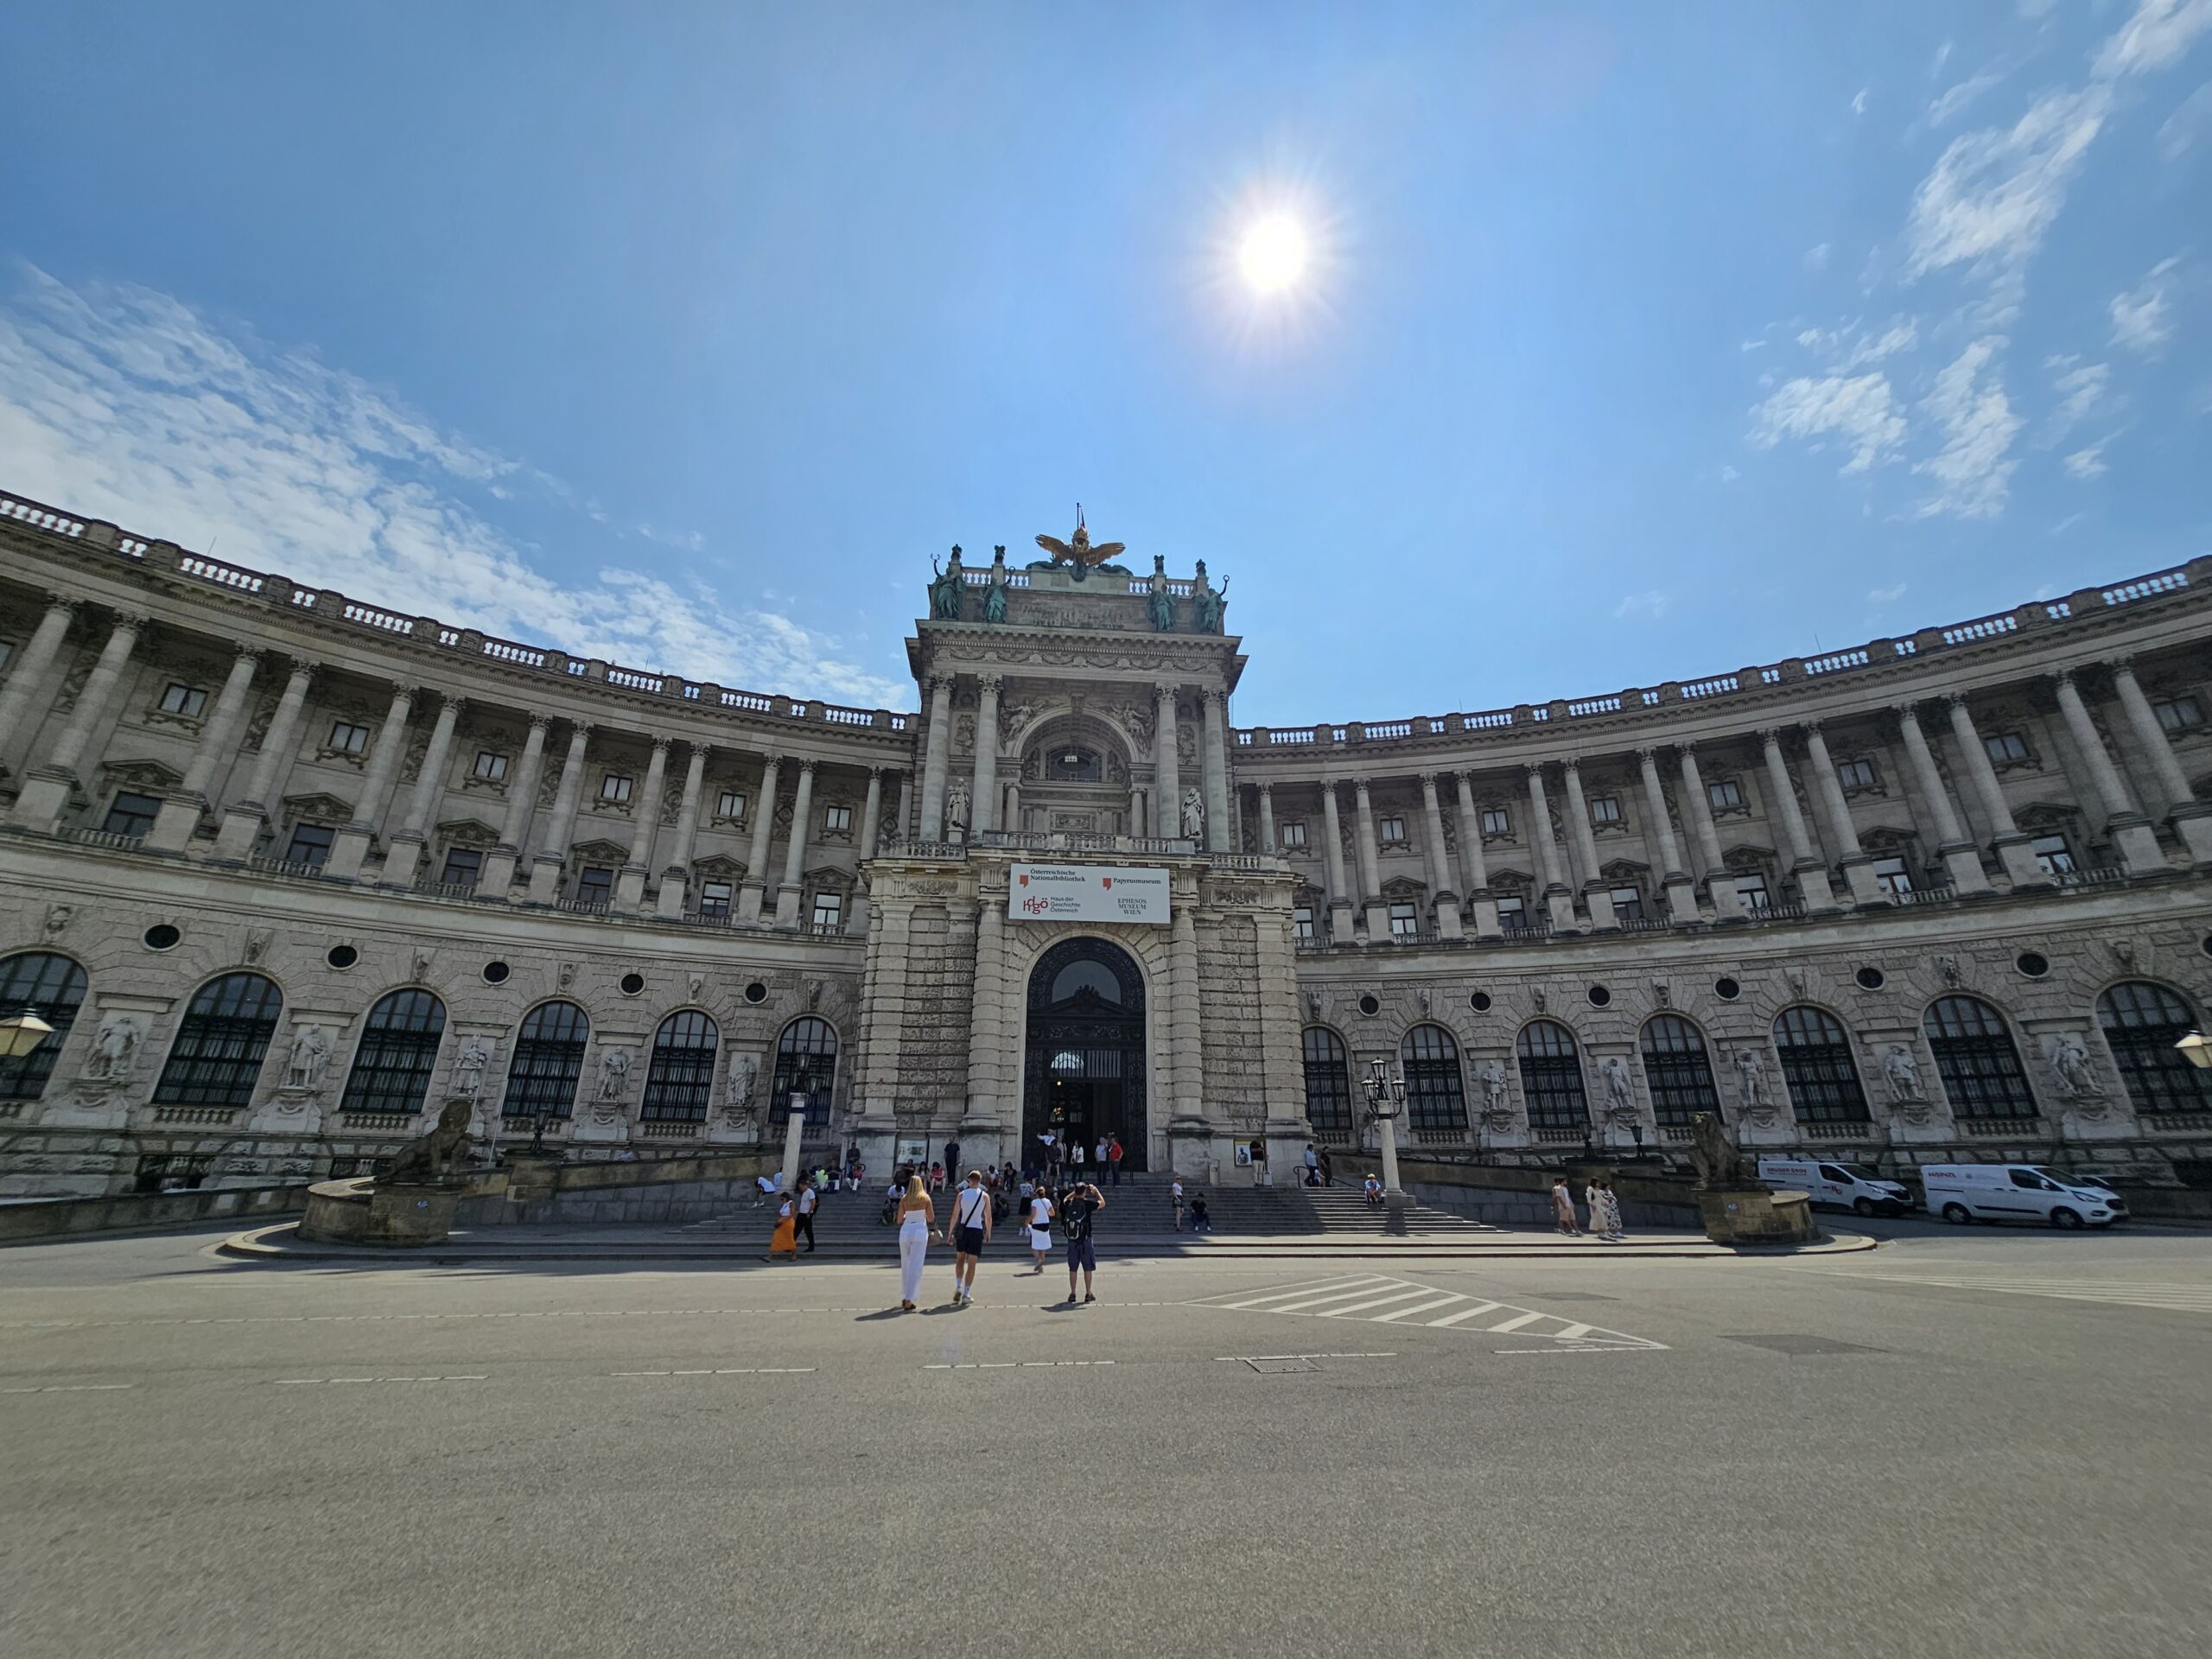 The semi circle of the Hofburg Palace from the front.